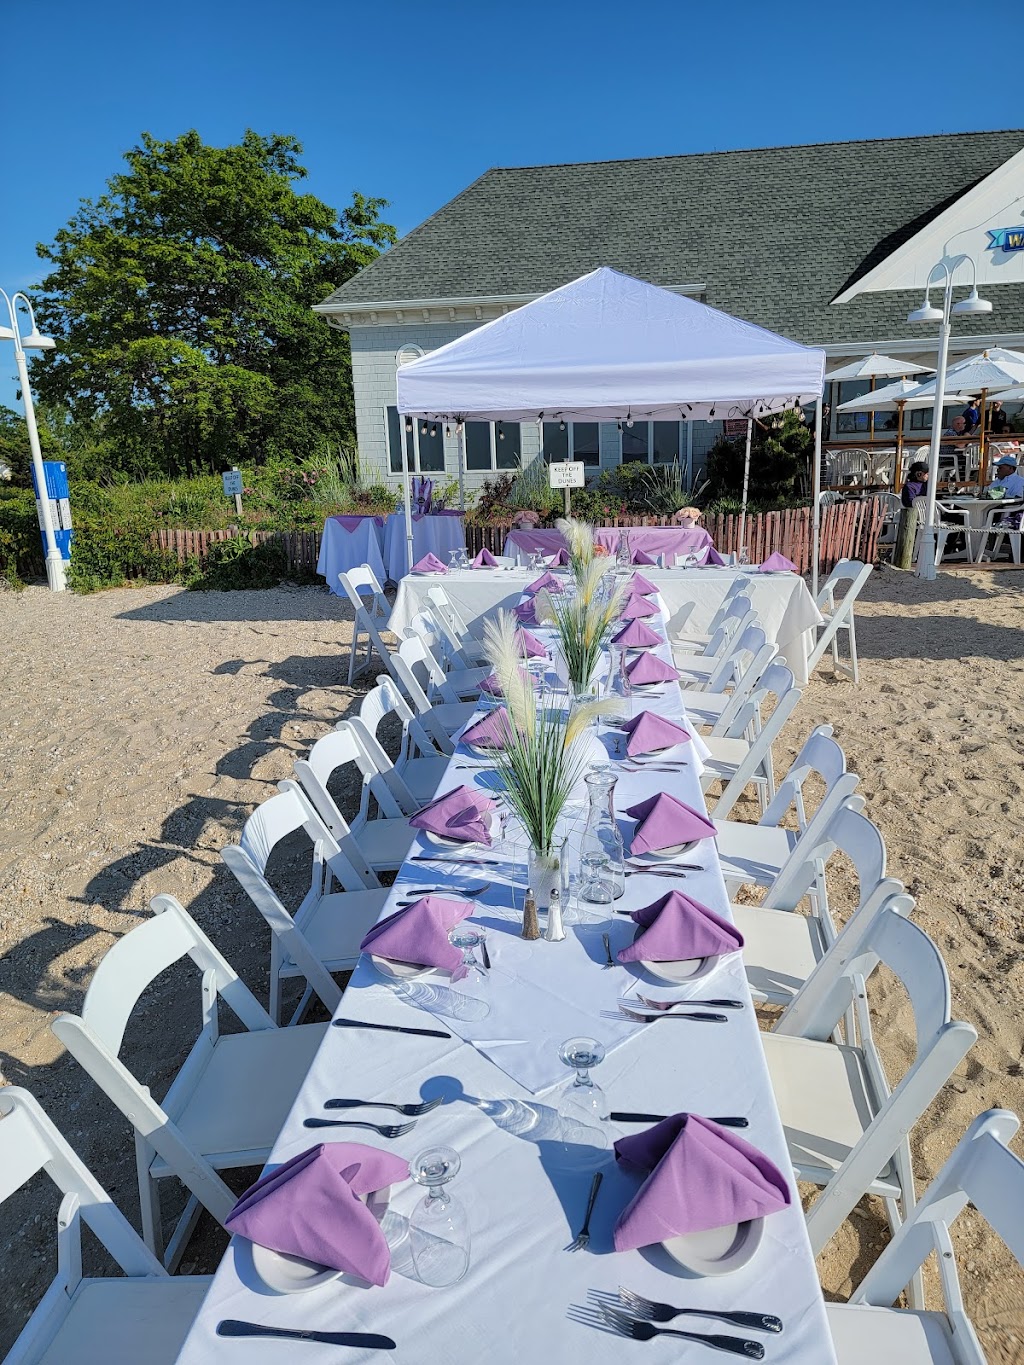 Walls Wharf Restaurant and Catering | 18 Greenwich Ave, Bayville, NY 11709 | Phone: (516) 628-9696